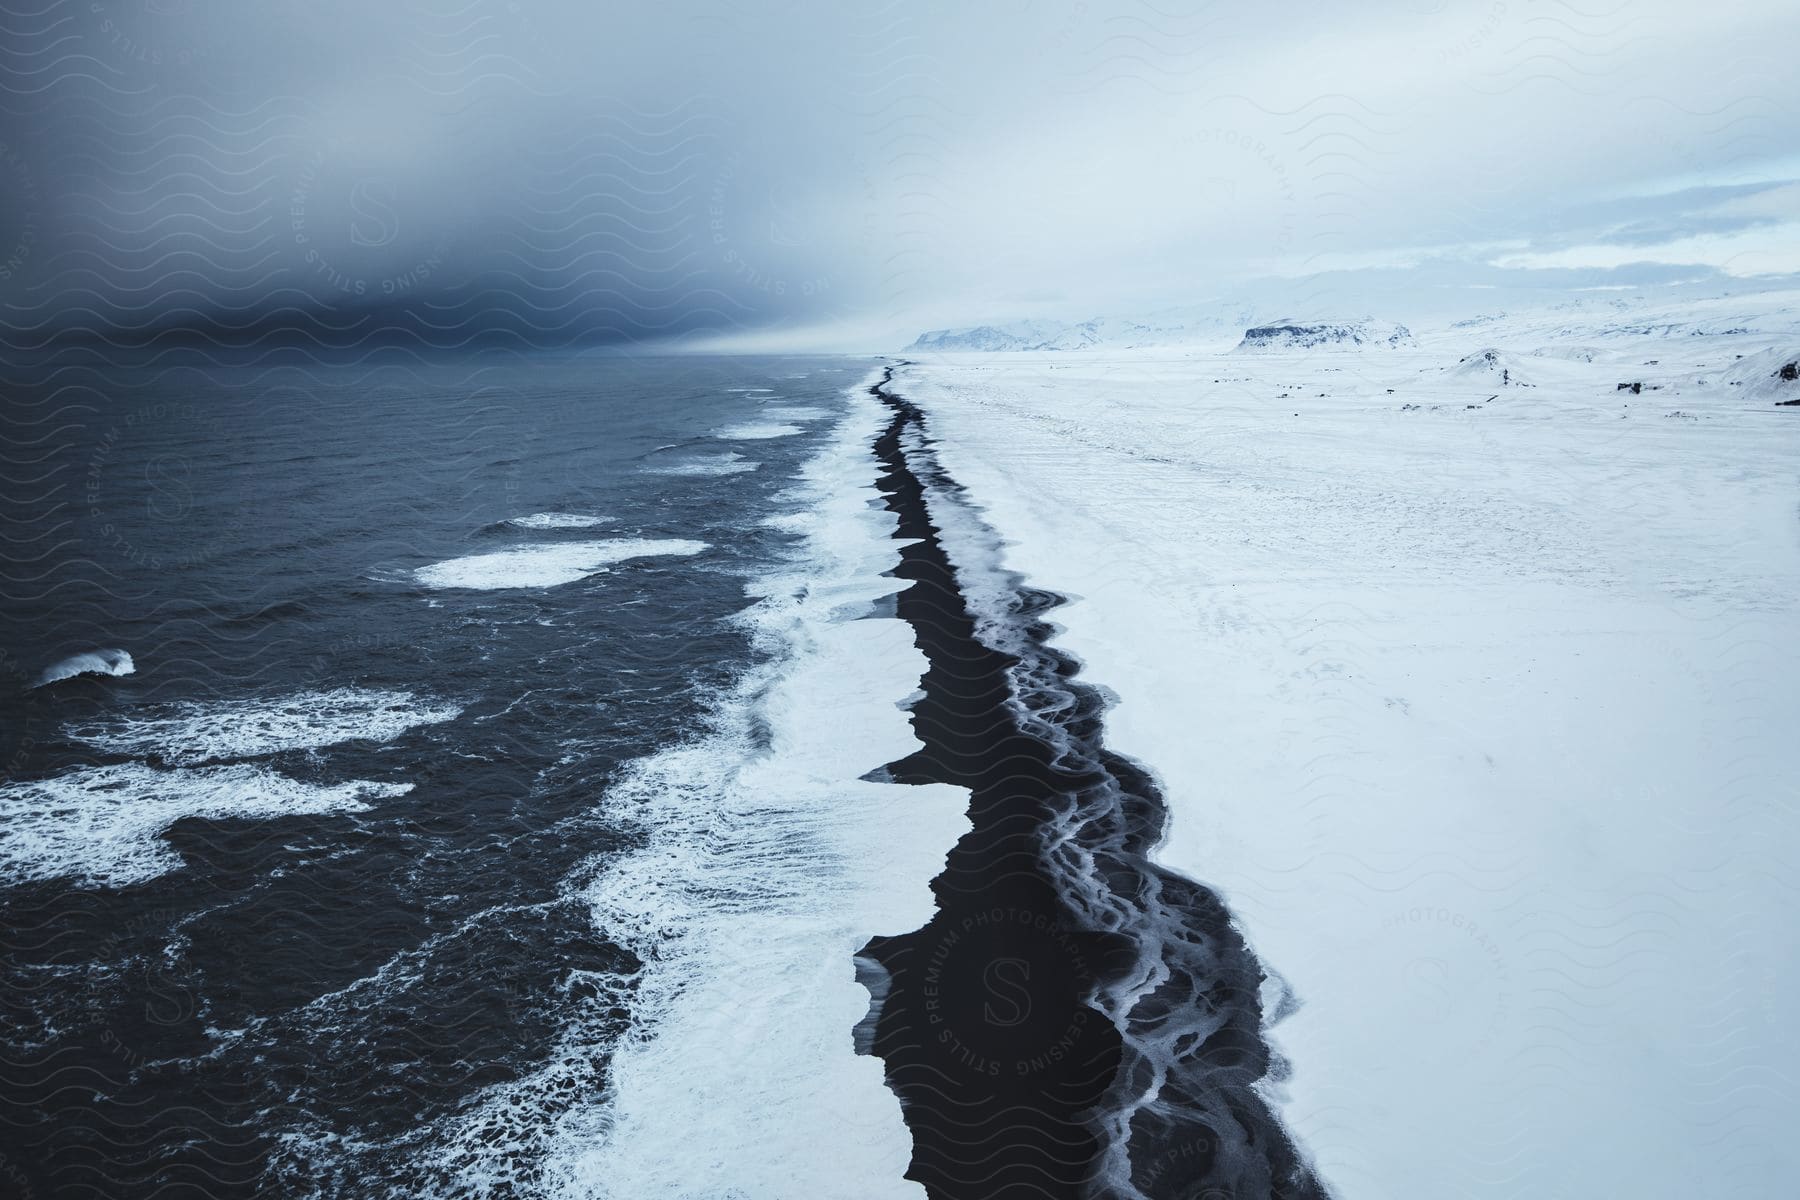 A frozen shoreline with icy waters and a snowy slope under a cloudy sky